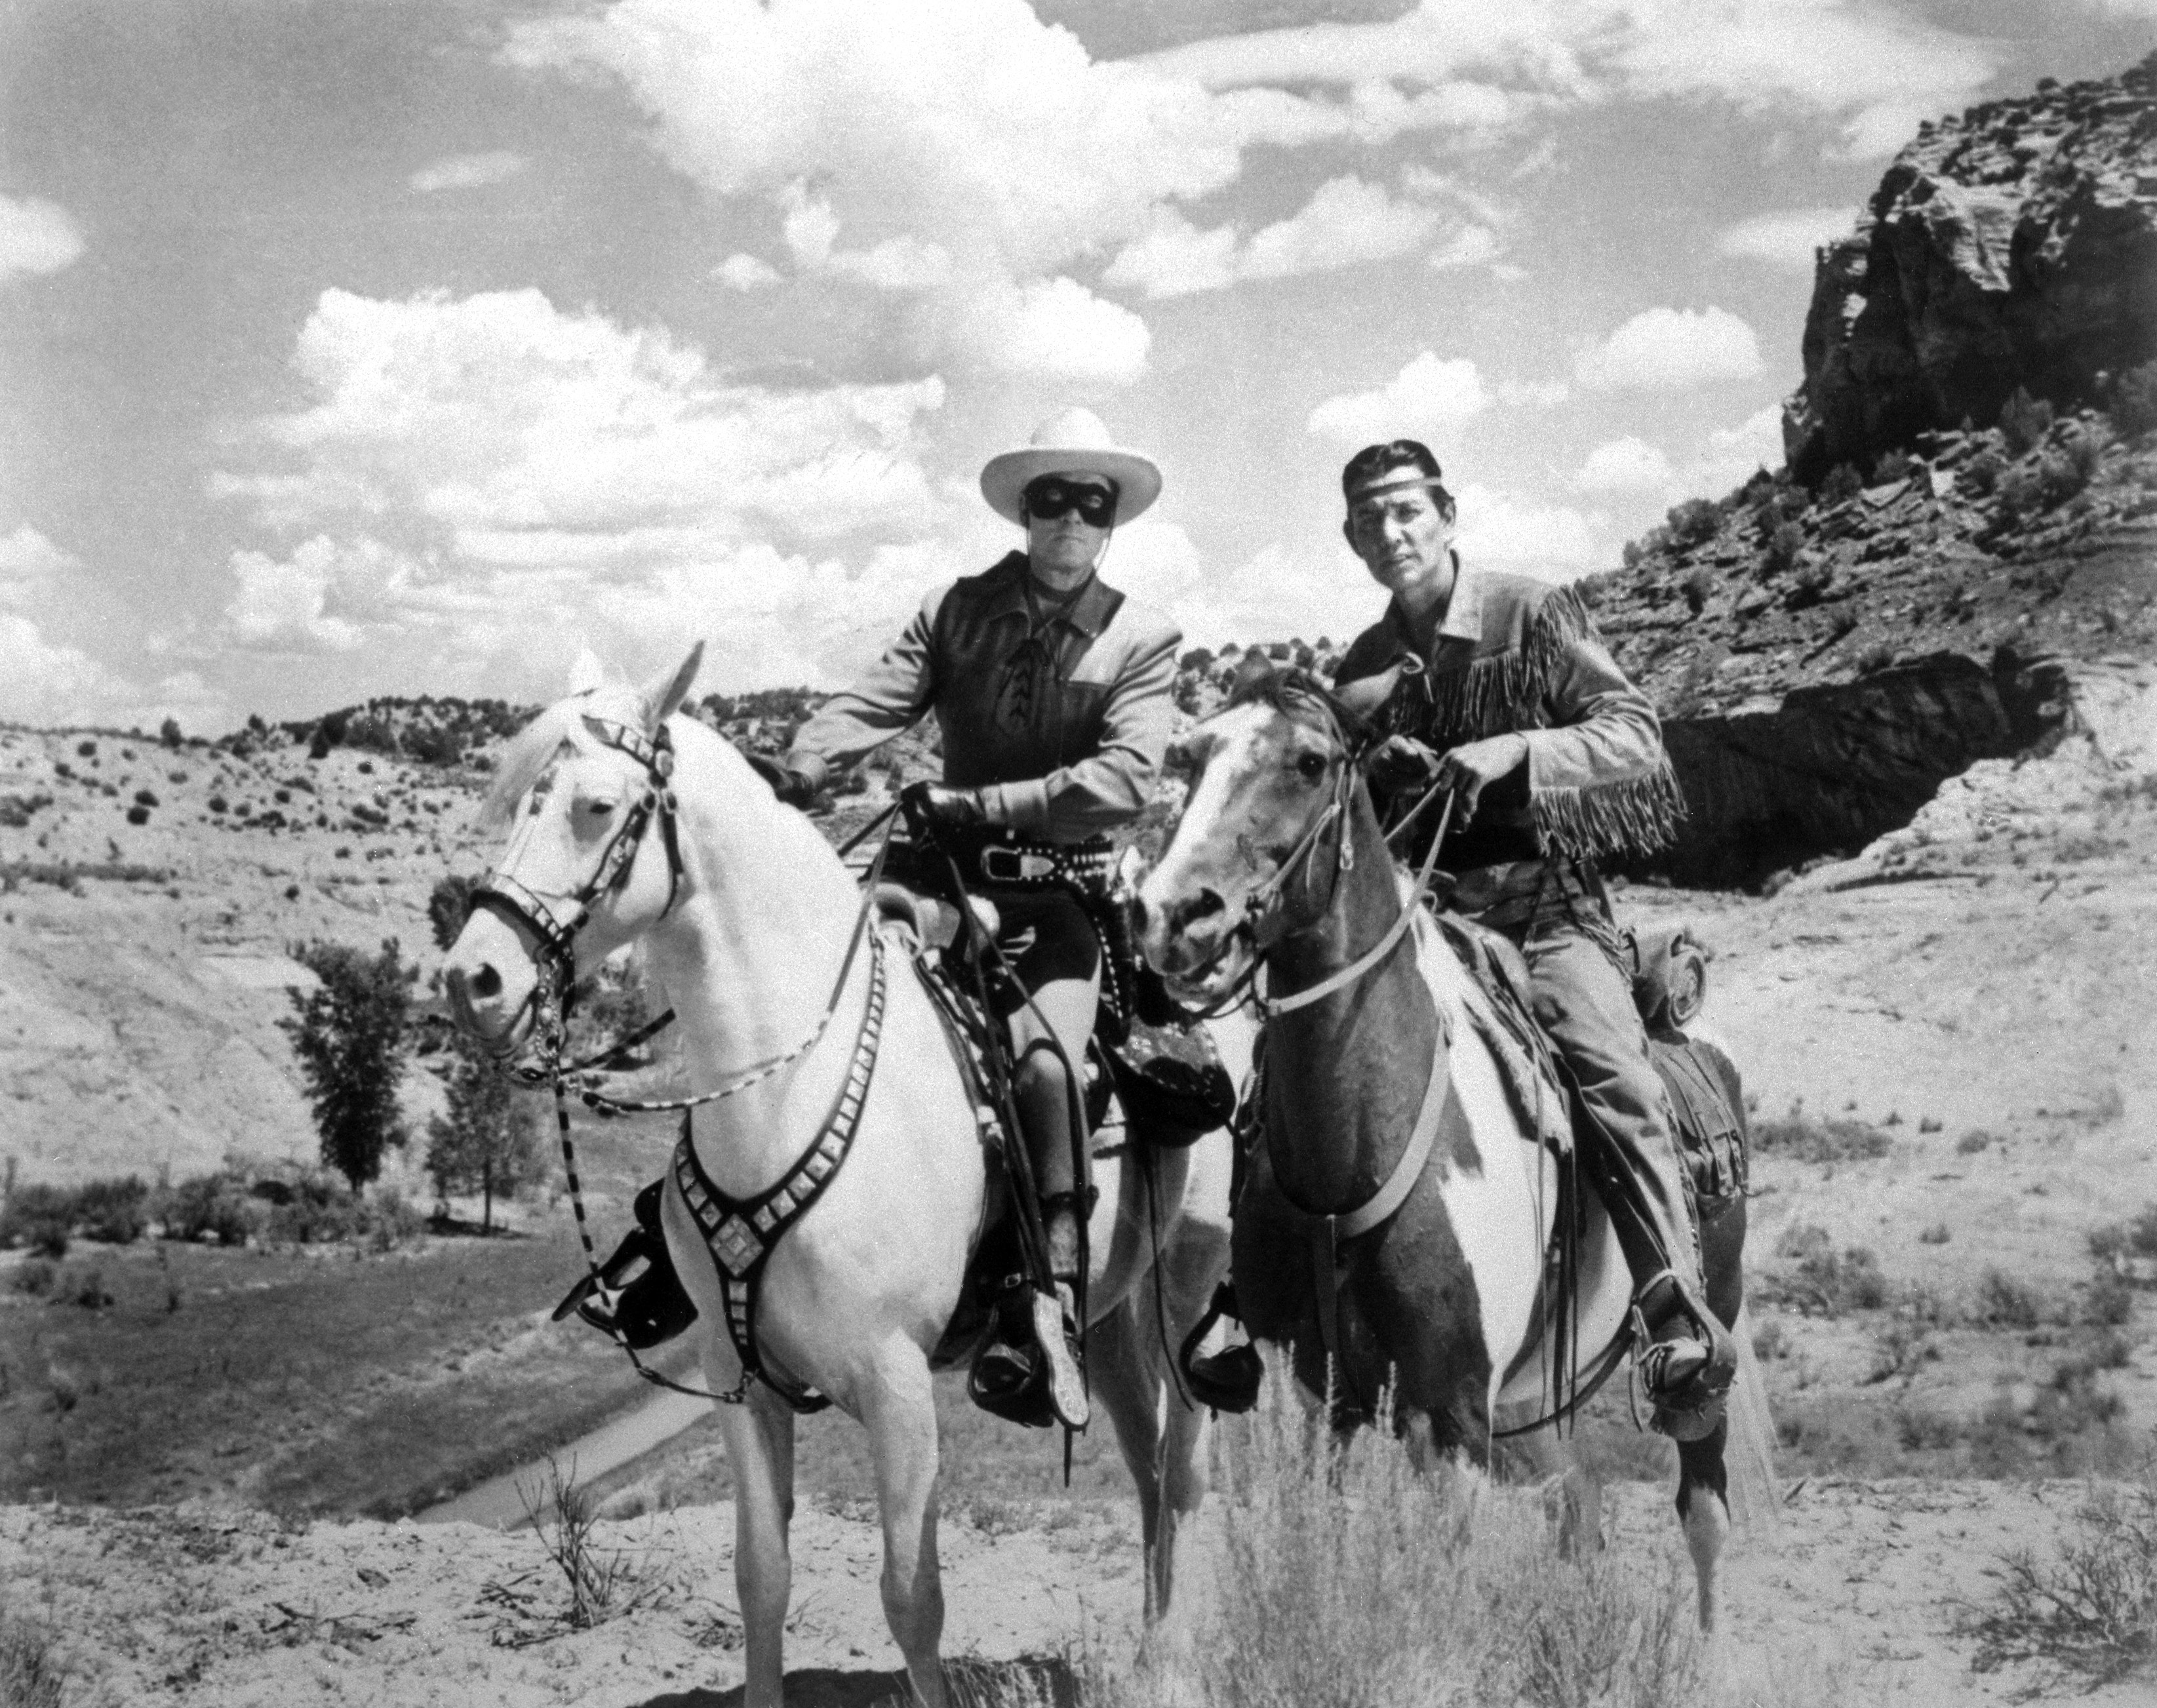 On this day in history, Jan. 30, 1933, 'The Lone Ranger' debuts, trotting into American cultural lore